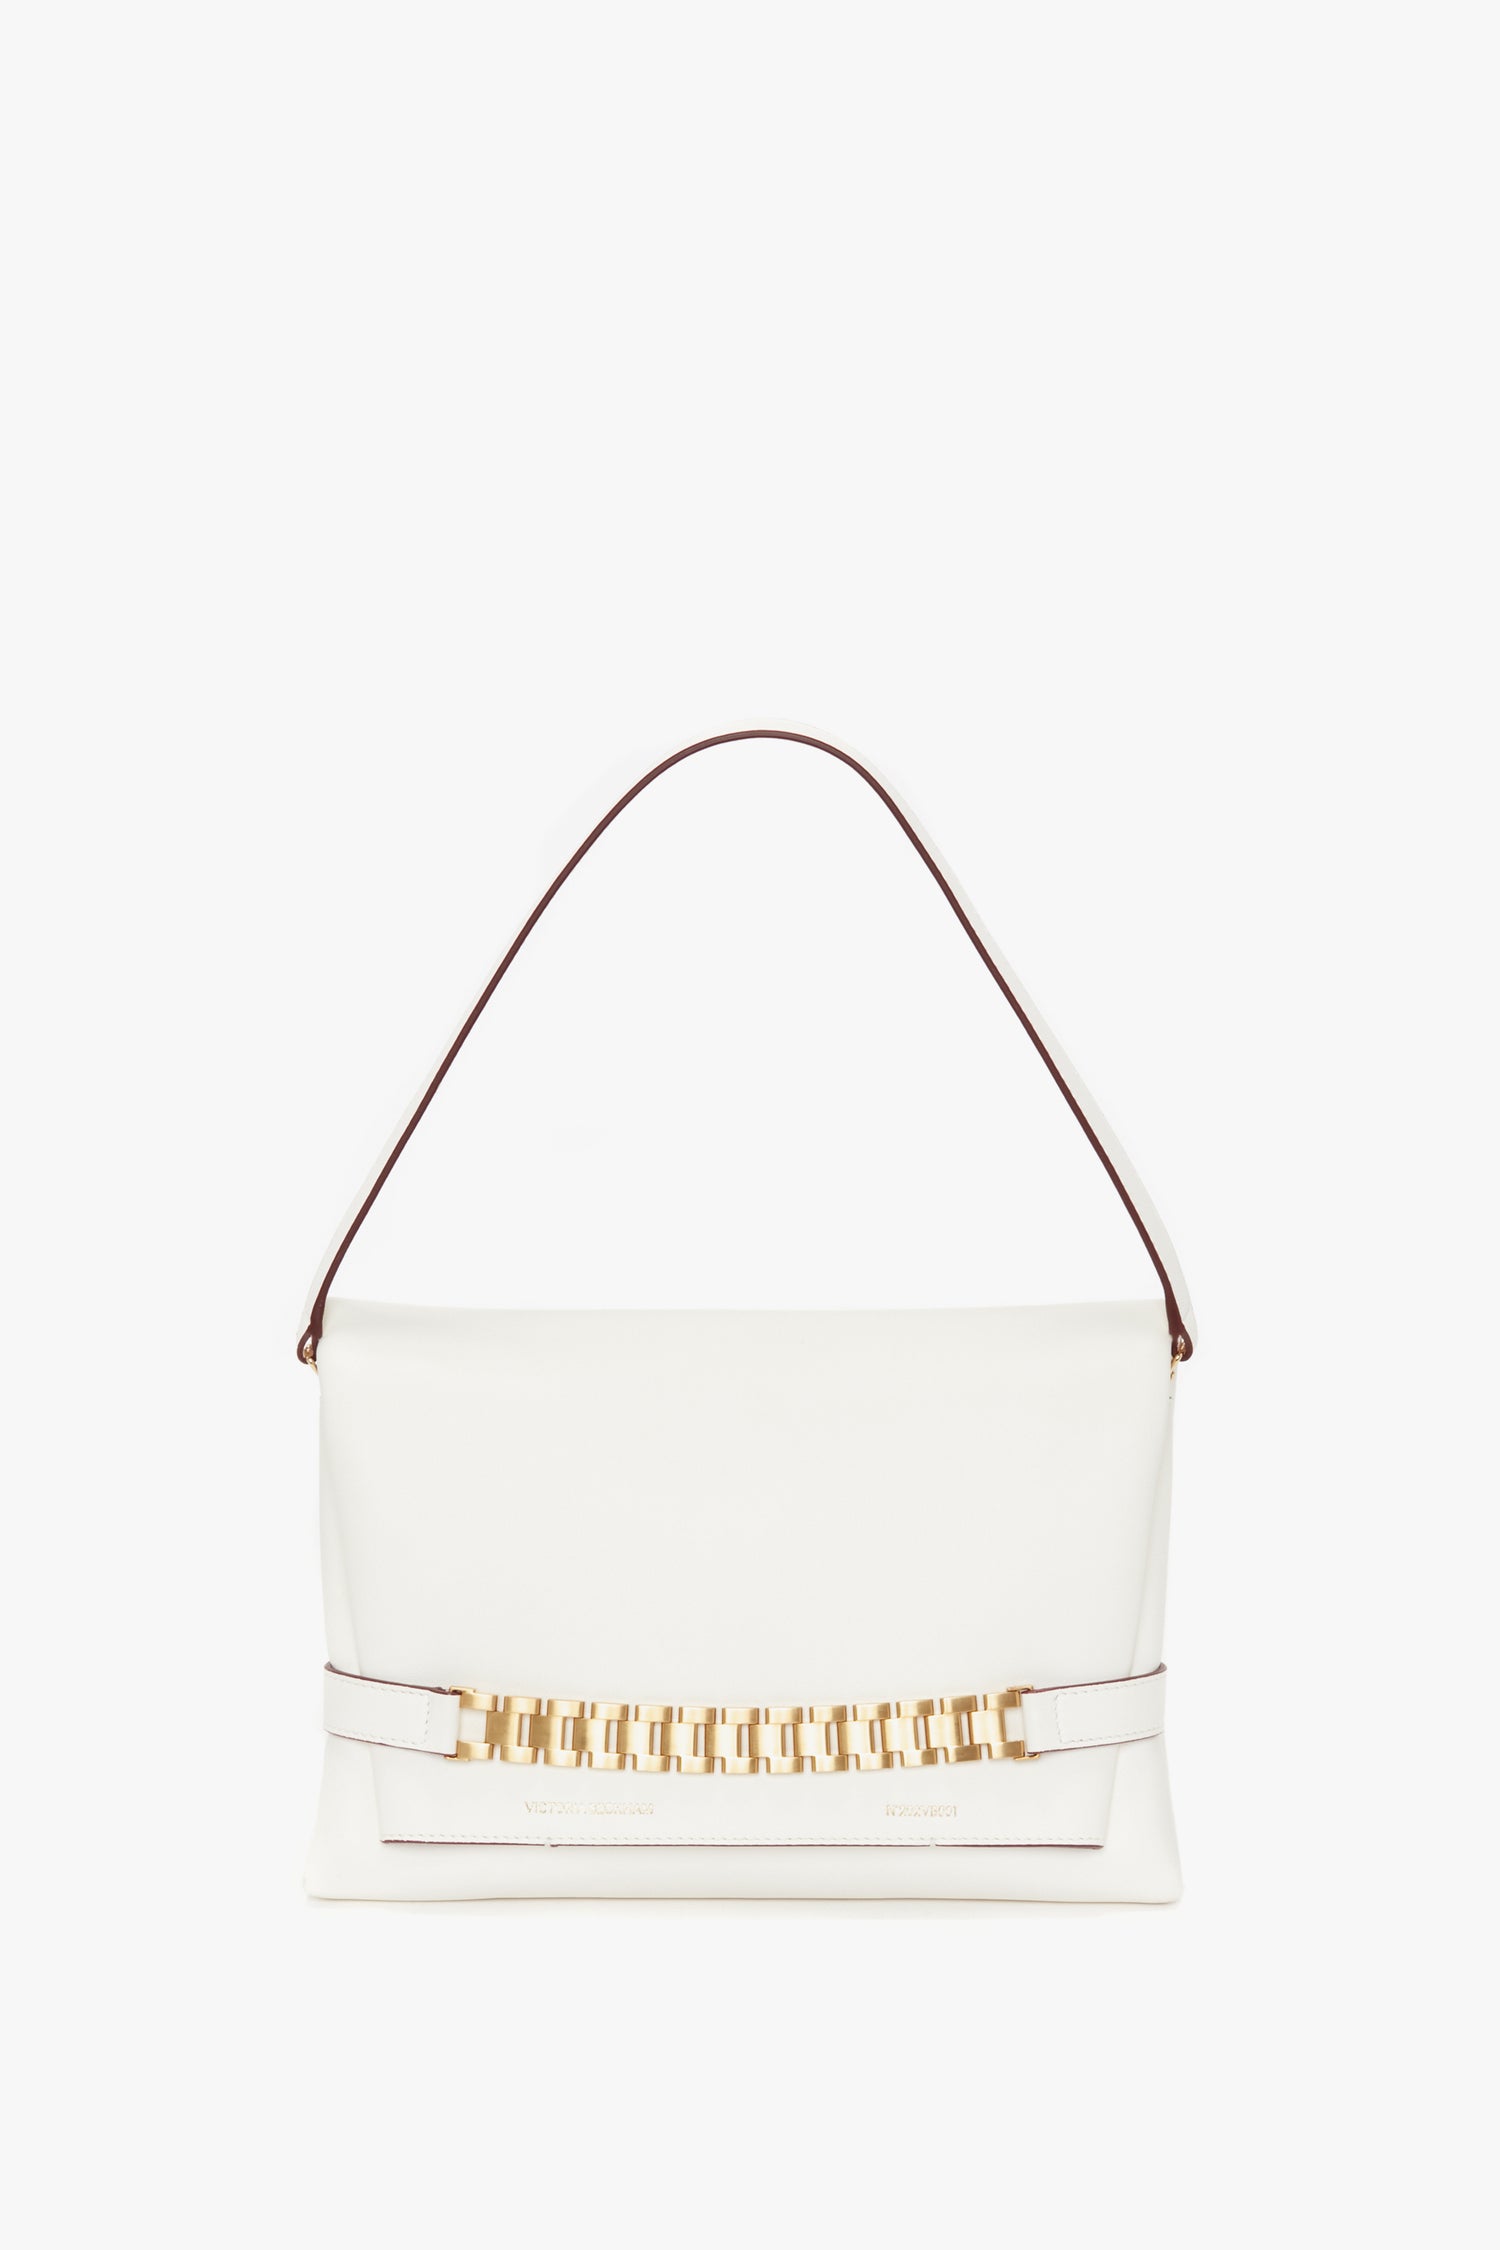 A white Victoria Beckham Chain Pouch with Strap In White Leather, featuring a gold chain detail and a single brown handle, isolated on a white background.